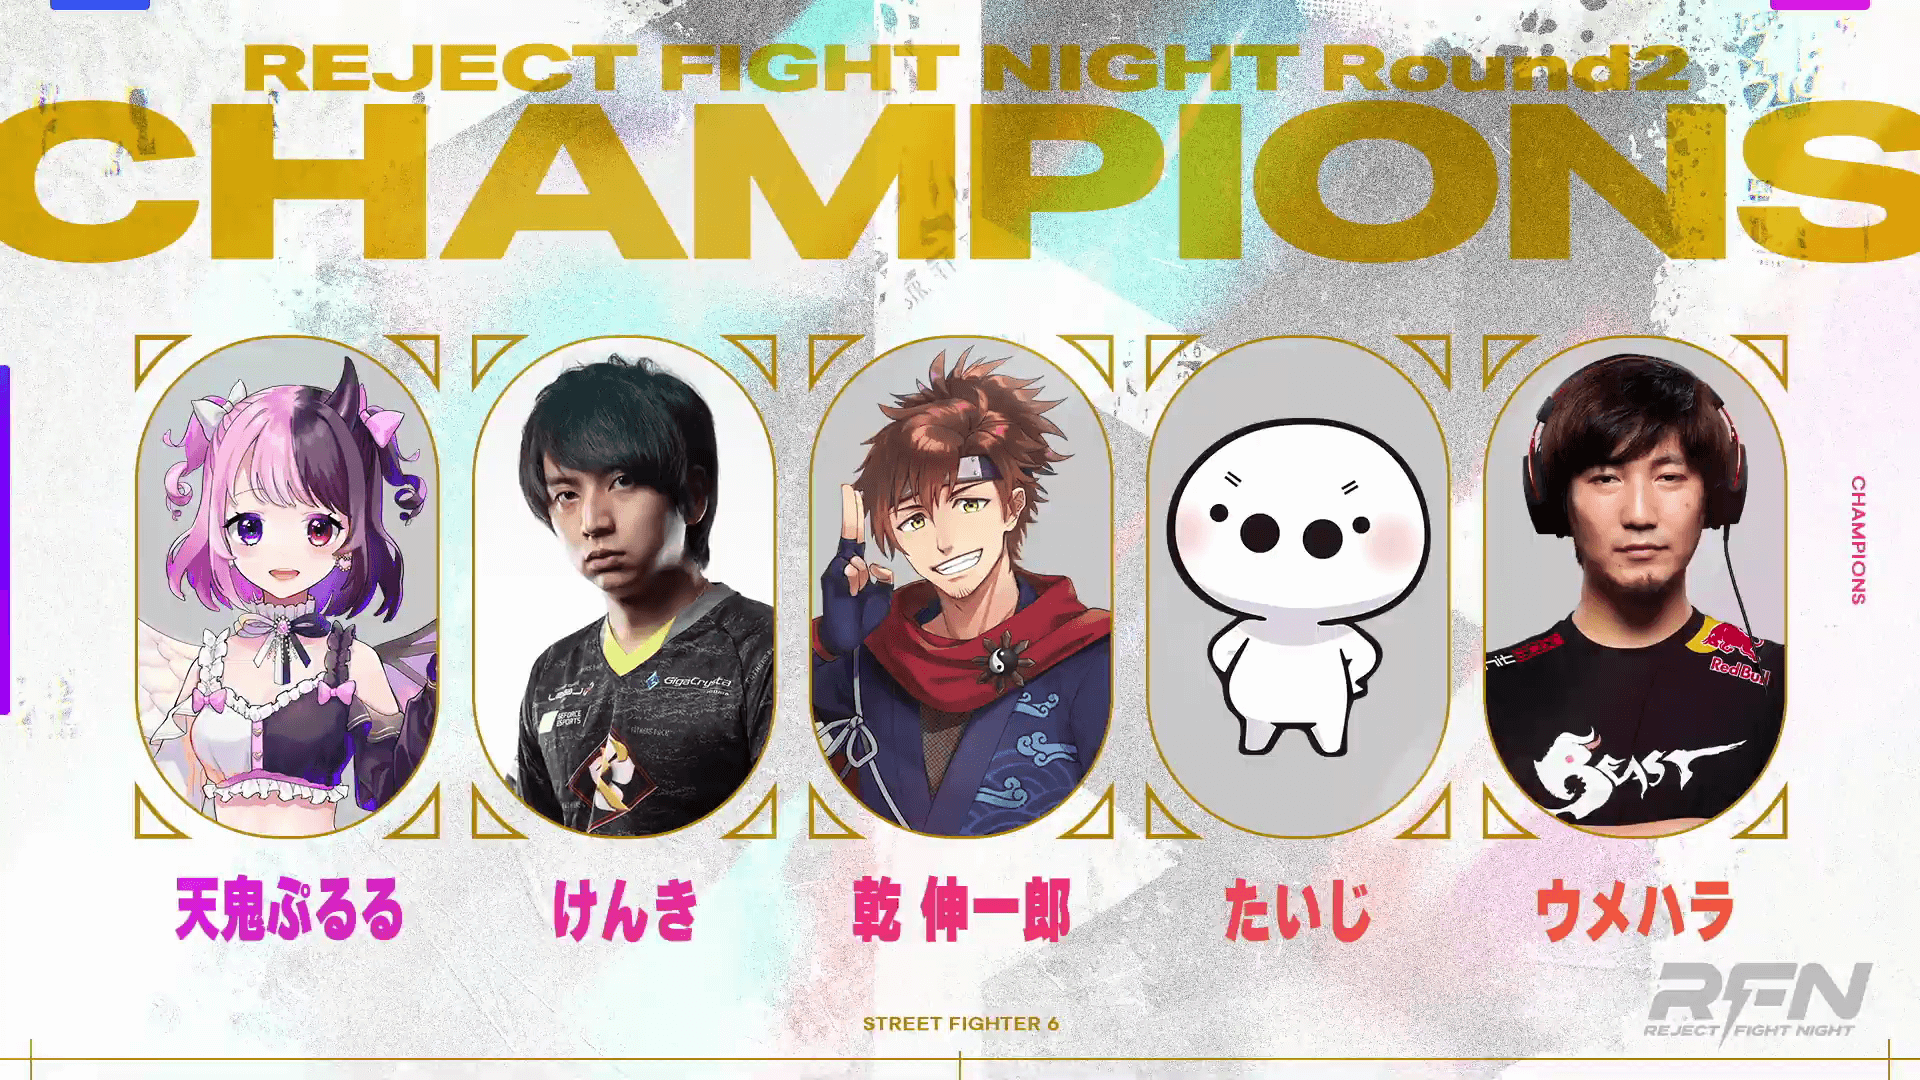 Reject Fight Night Round 2 Results: Daigo's Team Wins it All!